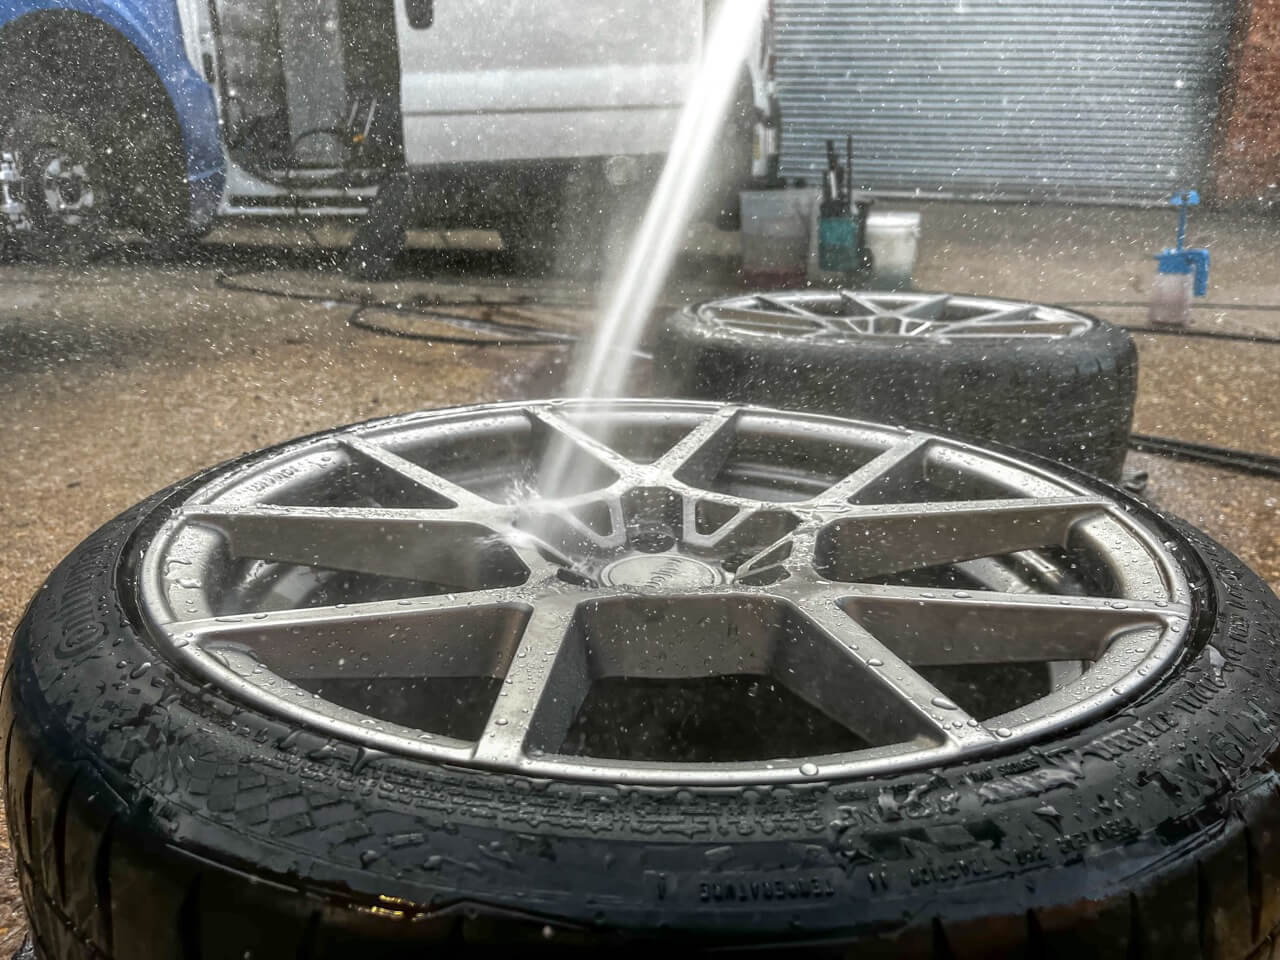 alloy wheels being sprayed with water to remove loose dirt